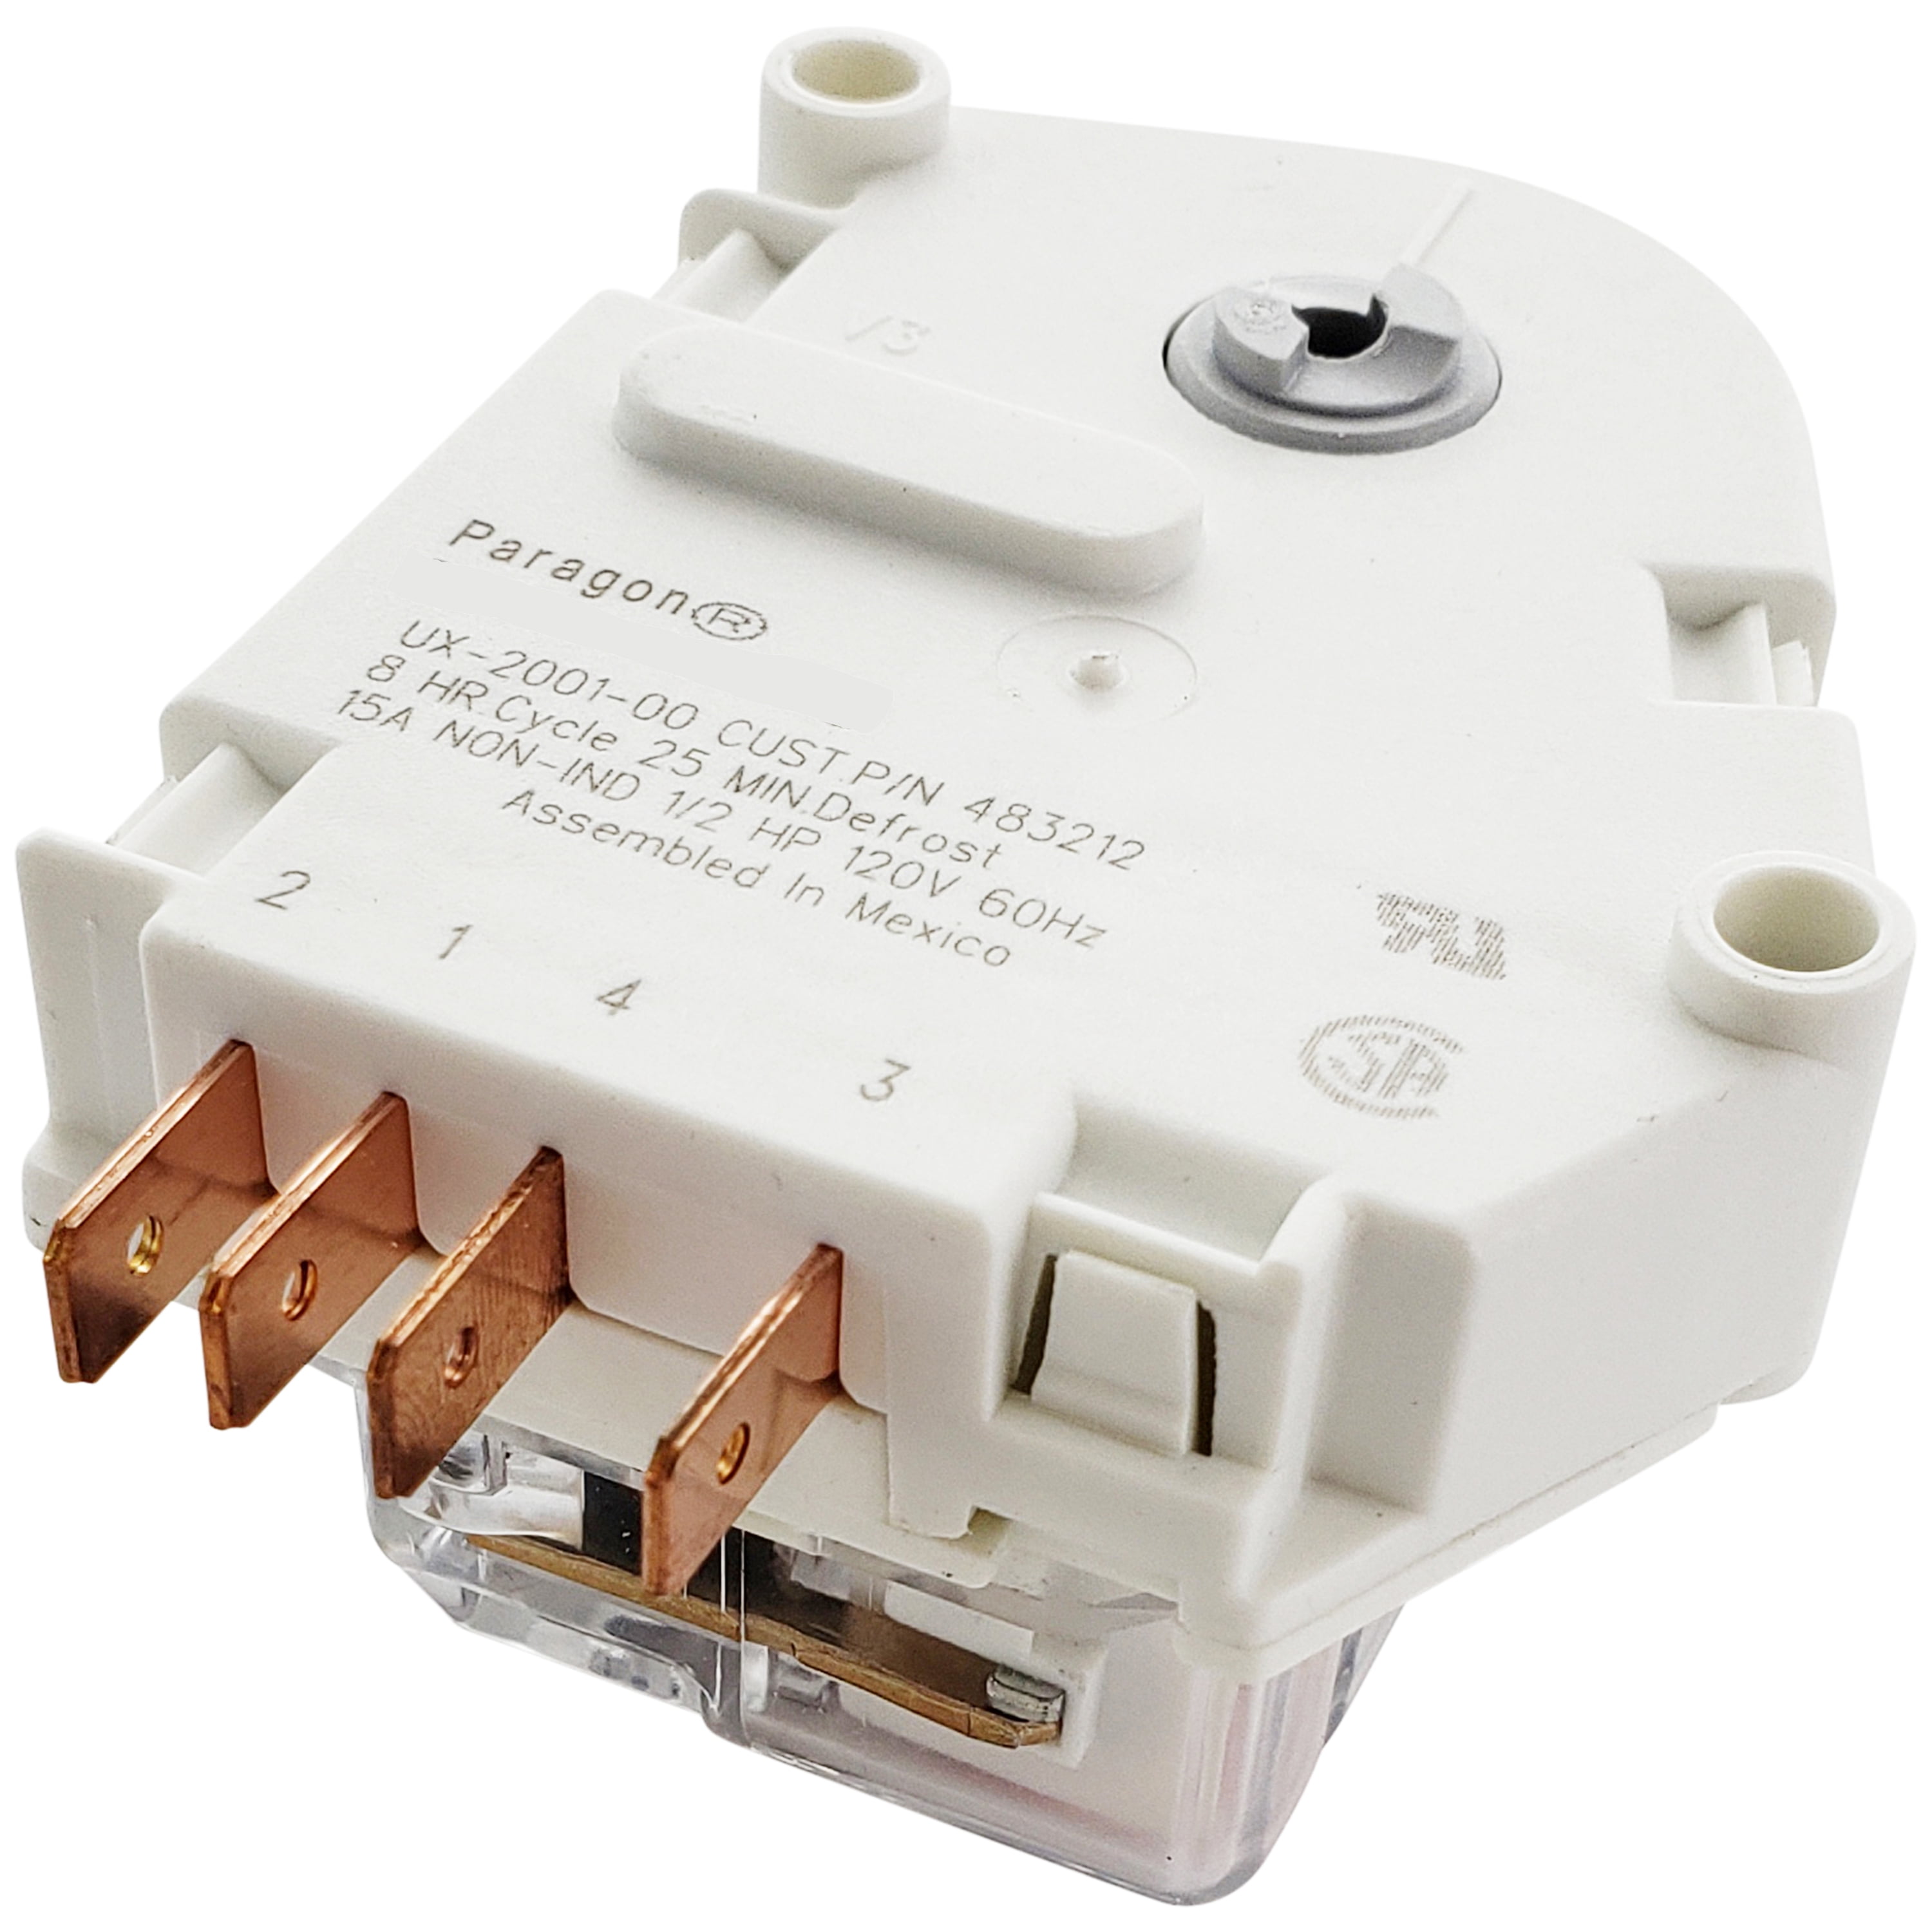 PS327819 2183400 Defrost Timer for Whirlpool Sears AP2984369